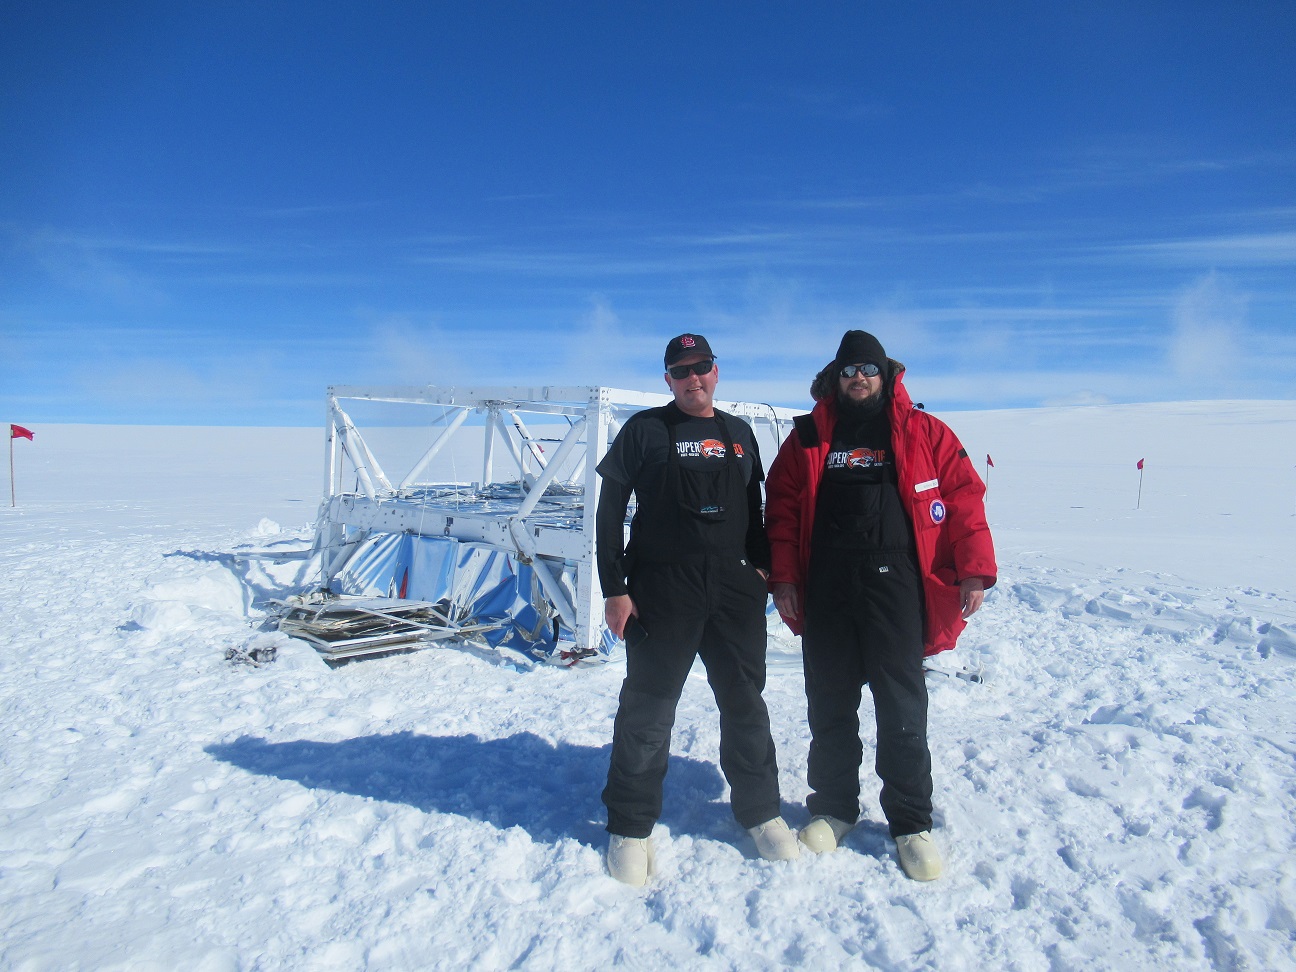 Brian Rauch (left), principal investigator of the TIGERISS mission concept, and Richard Bose, senior research engineer at Washington University in St. Louis, are seen in Antarctica on January 8, 2019